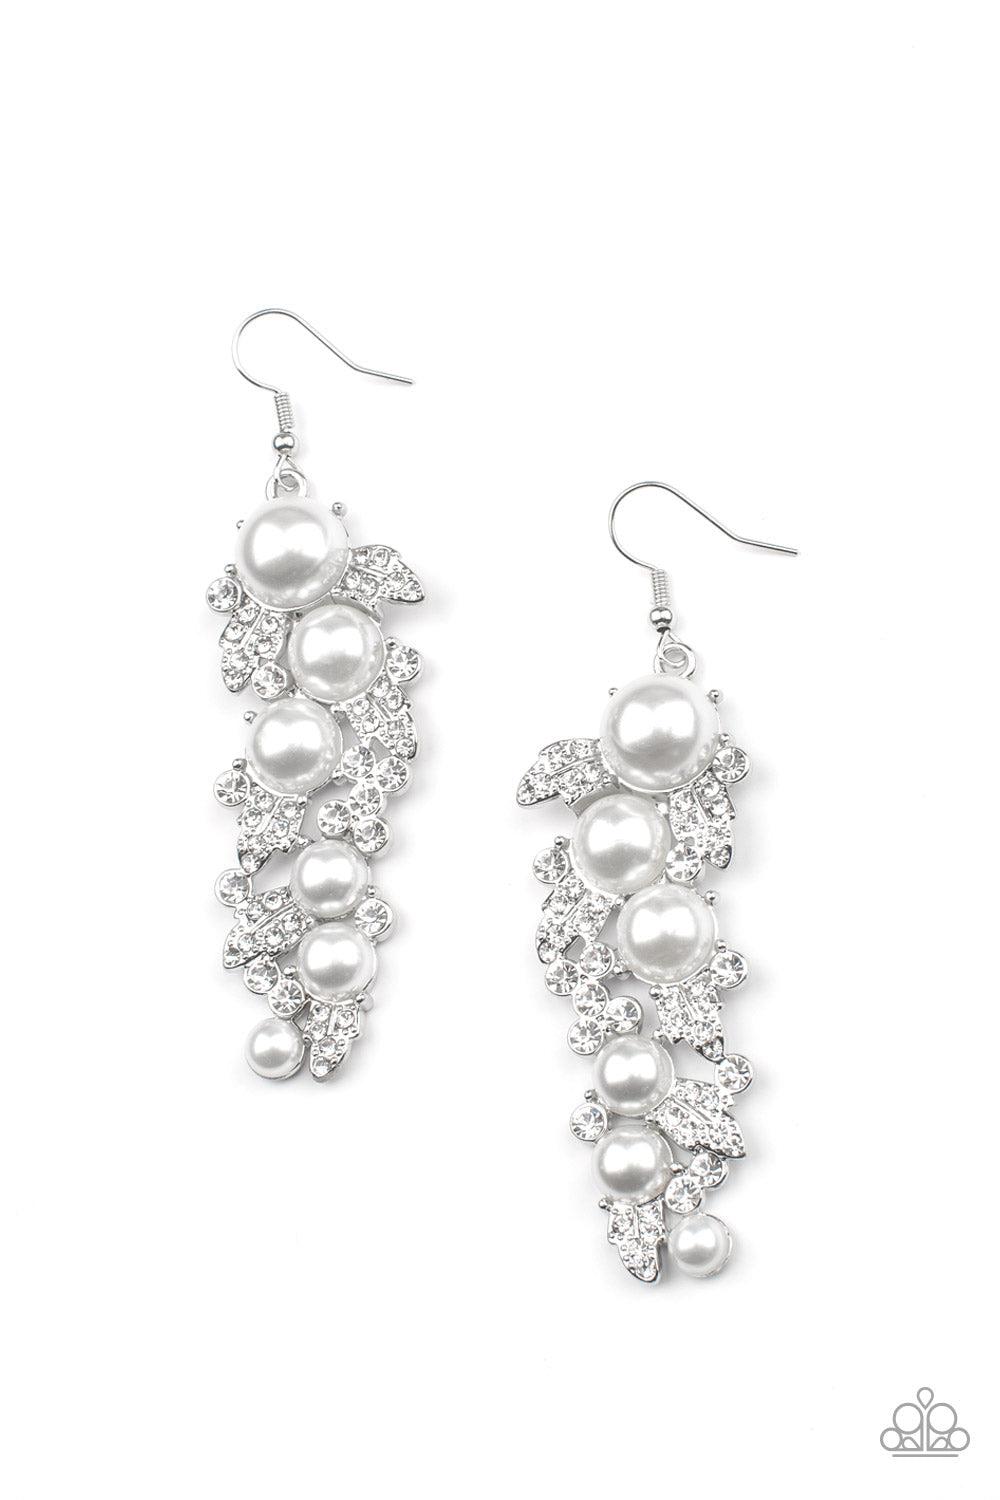 The Party Has Arrived White Pearl & Rhinestone Earrings - Paparazzi Accessories- lightbox - CarasShop.com - $5 Jewelry by Cara Jewels